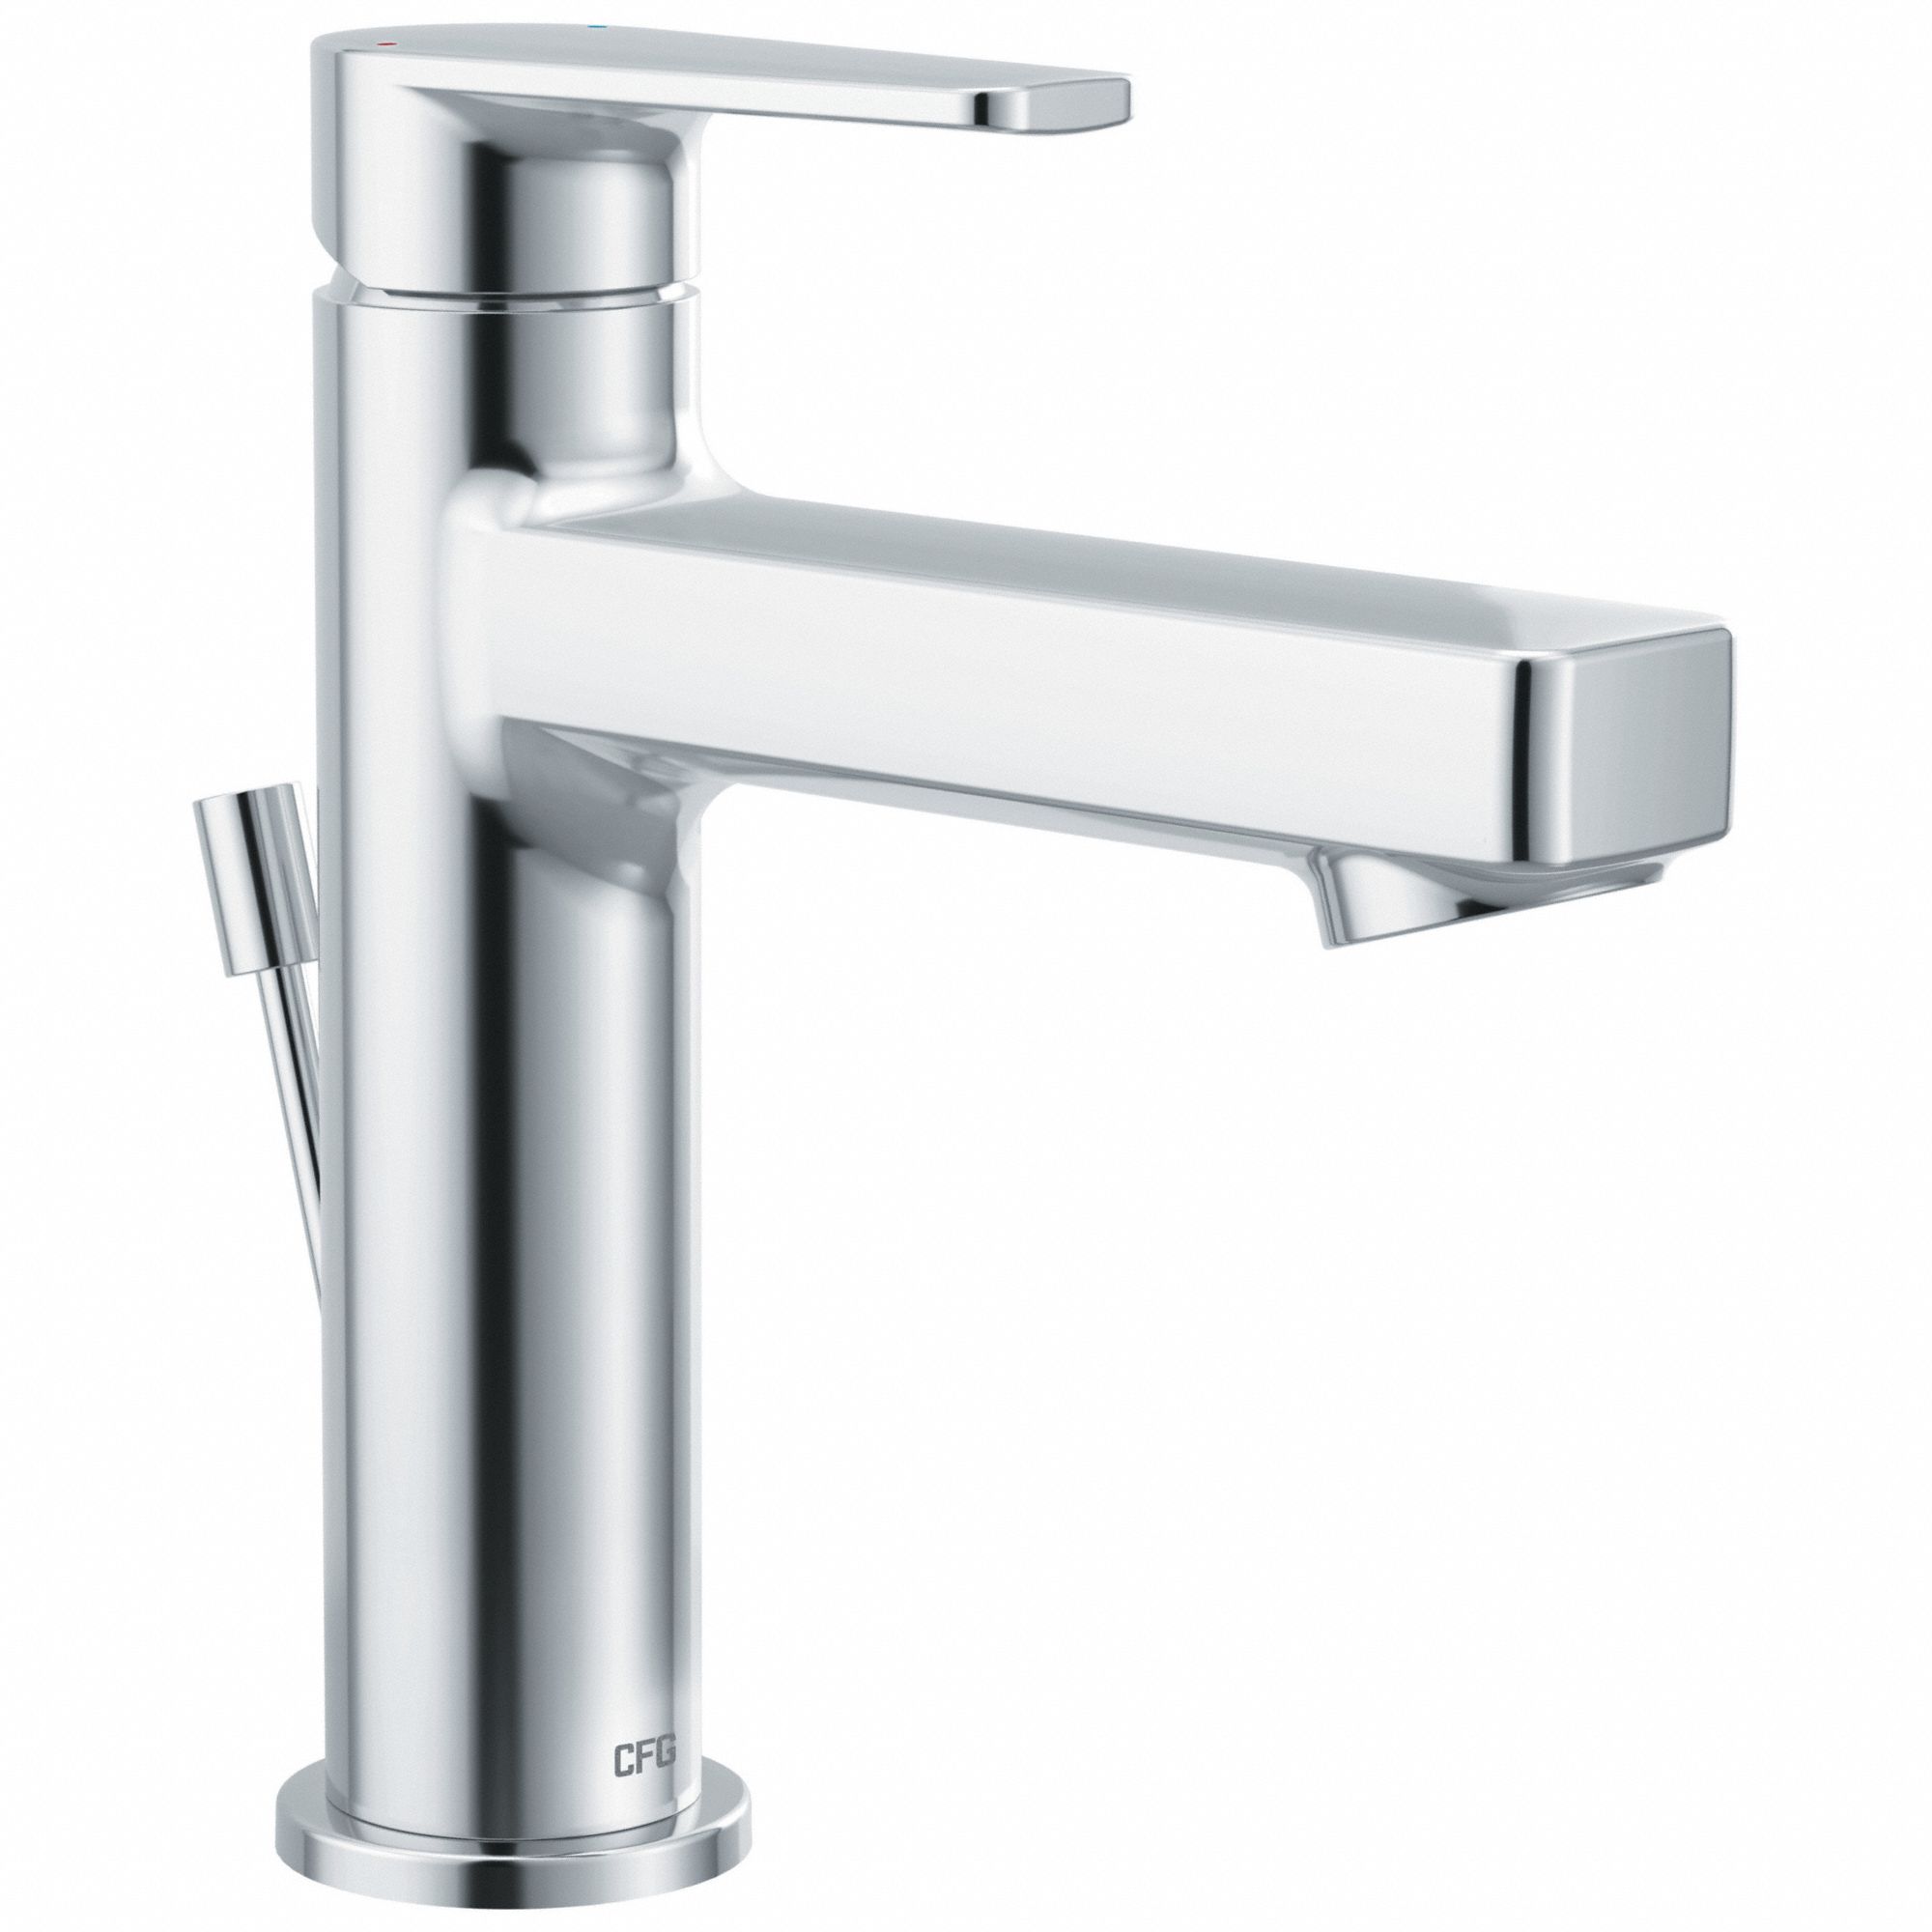 Bathroom Faucet: Slate™, 40051, Chrome Finish, 1.2 gpm Flow Rate, Drain with Pop-Up Rod Drain